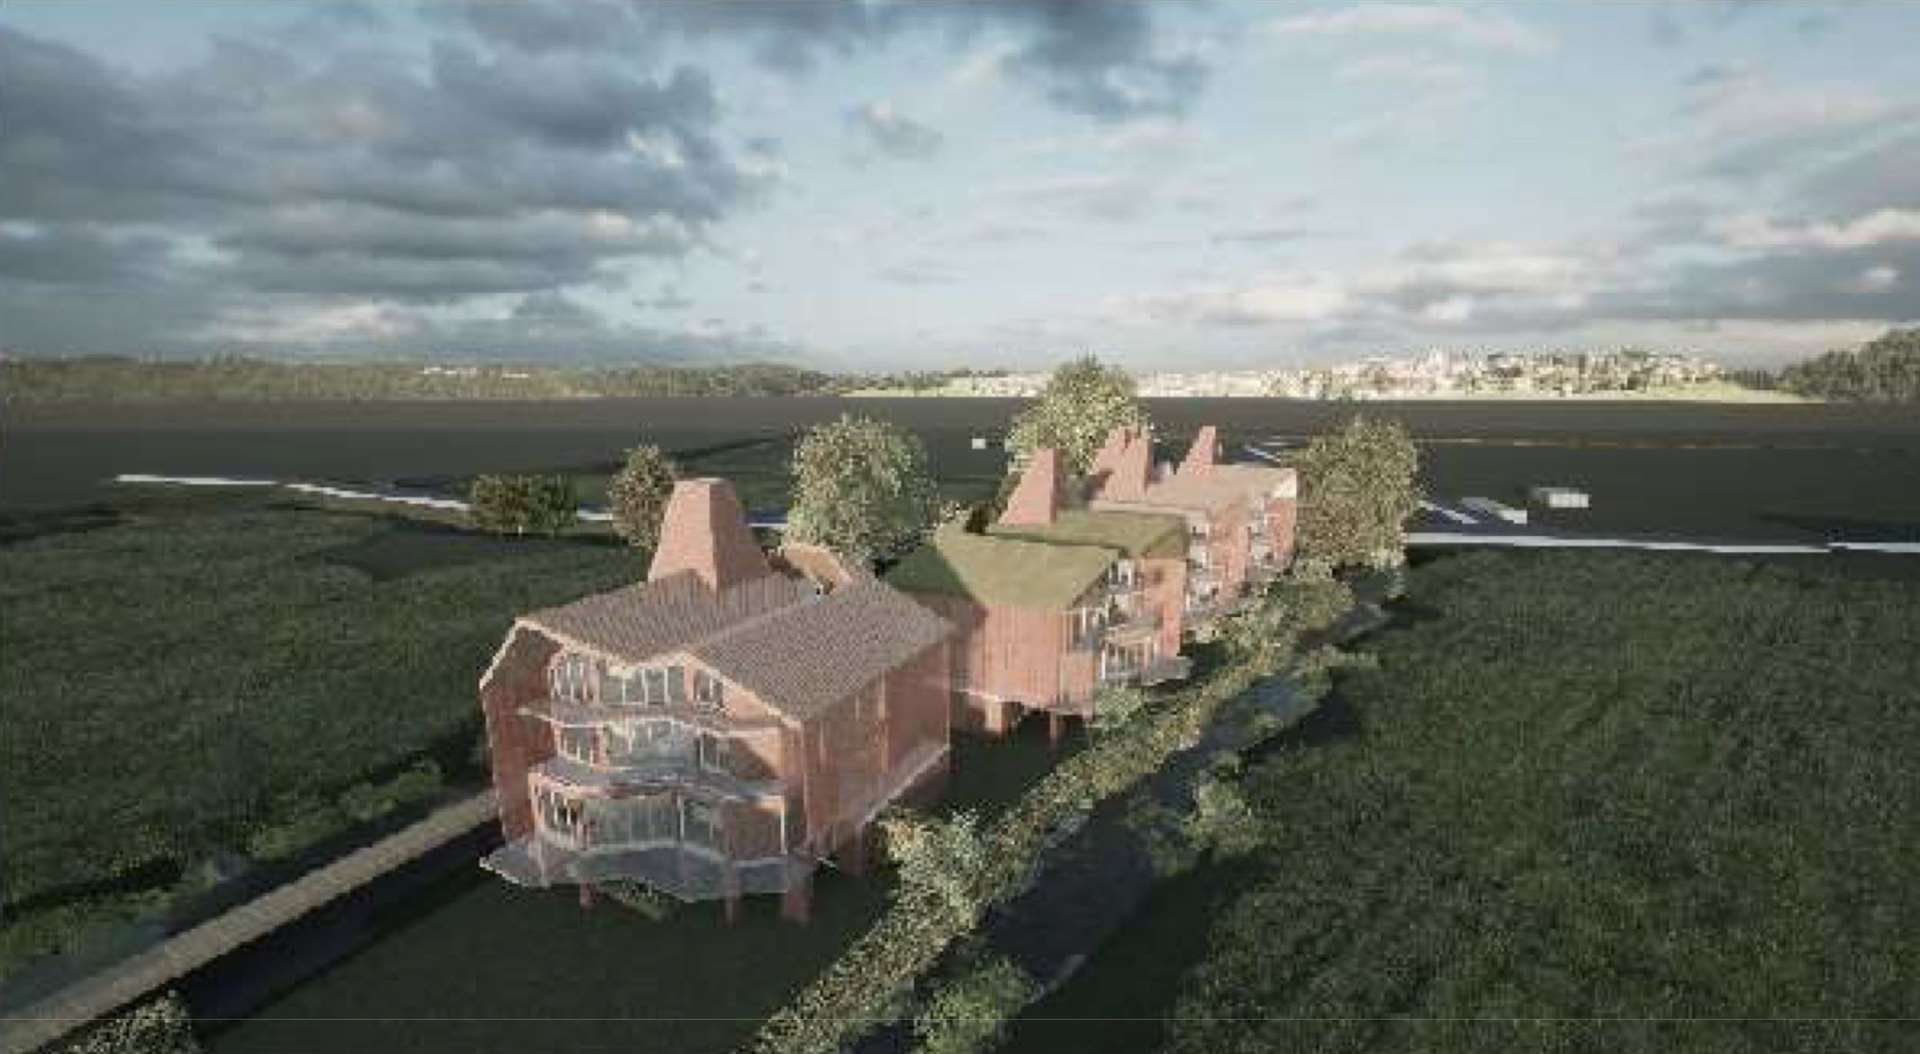 The homes have been designed based on oast houses in the county